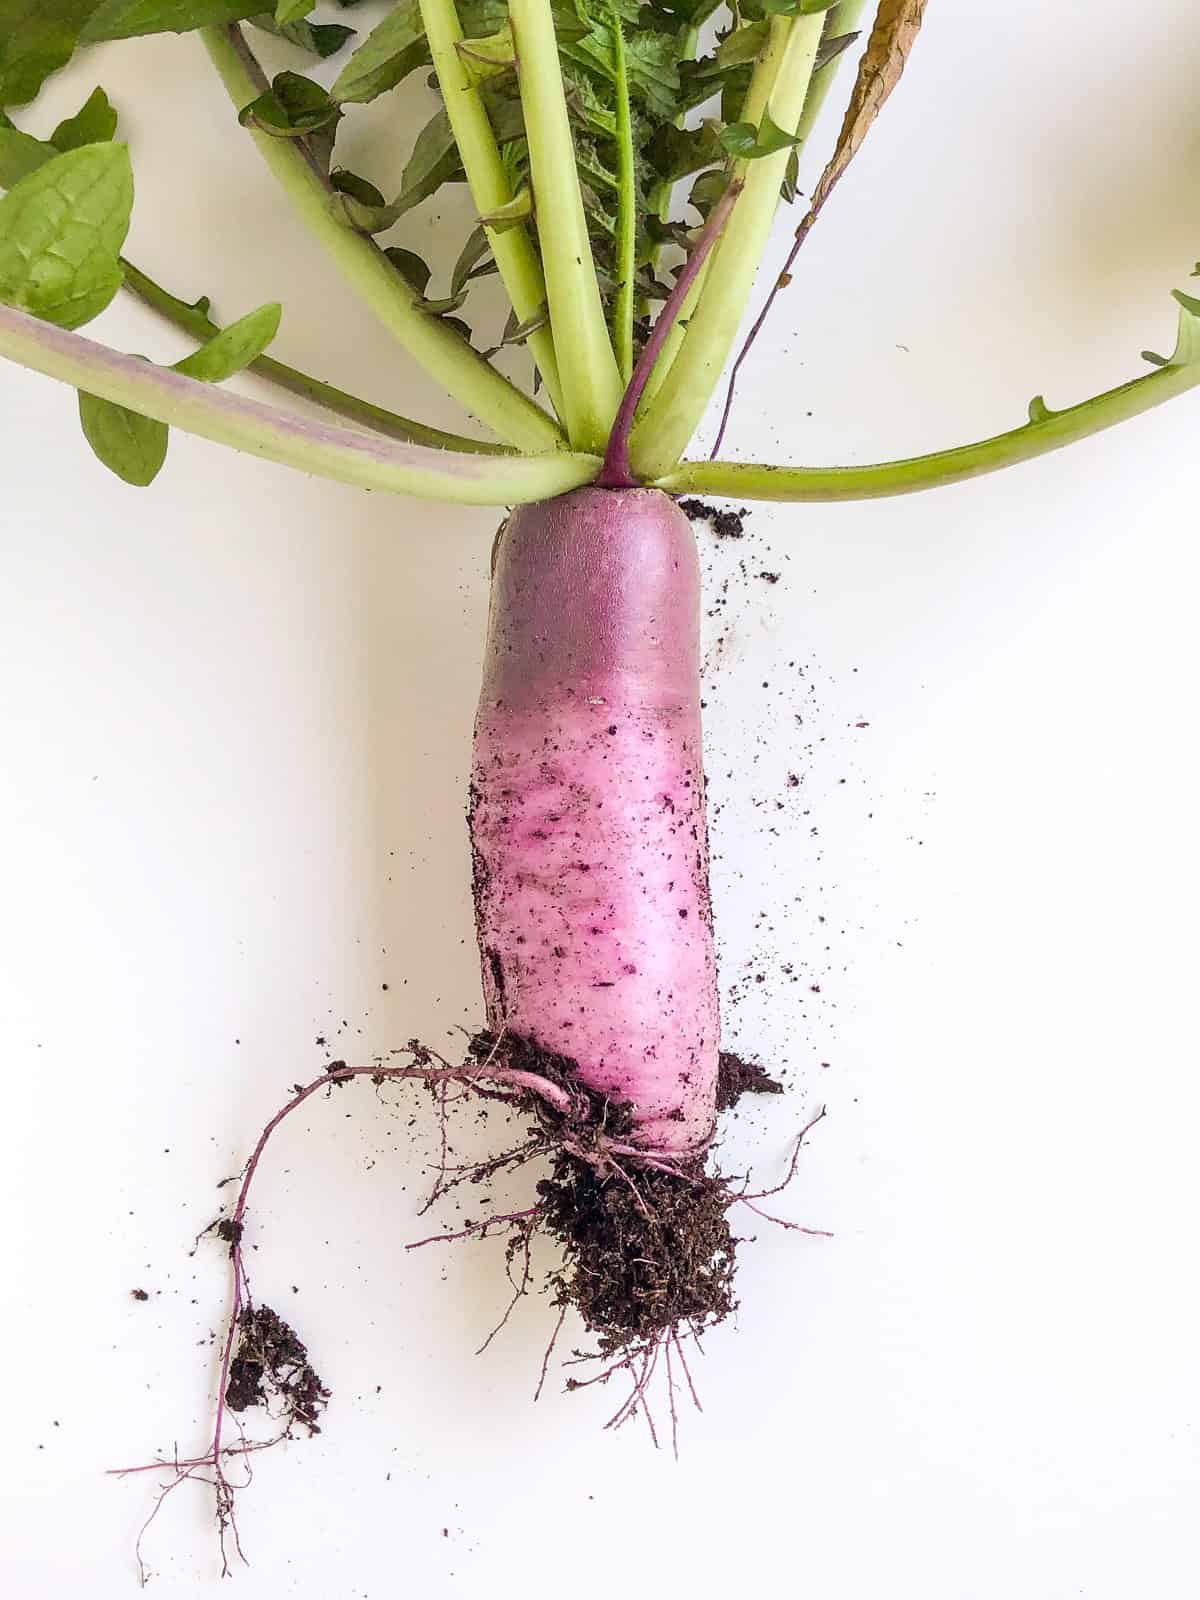 An image of a freshly picked purple daikon radish against a white countertop.